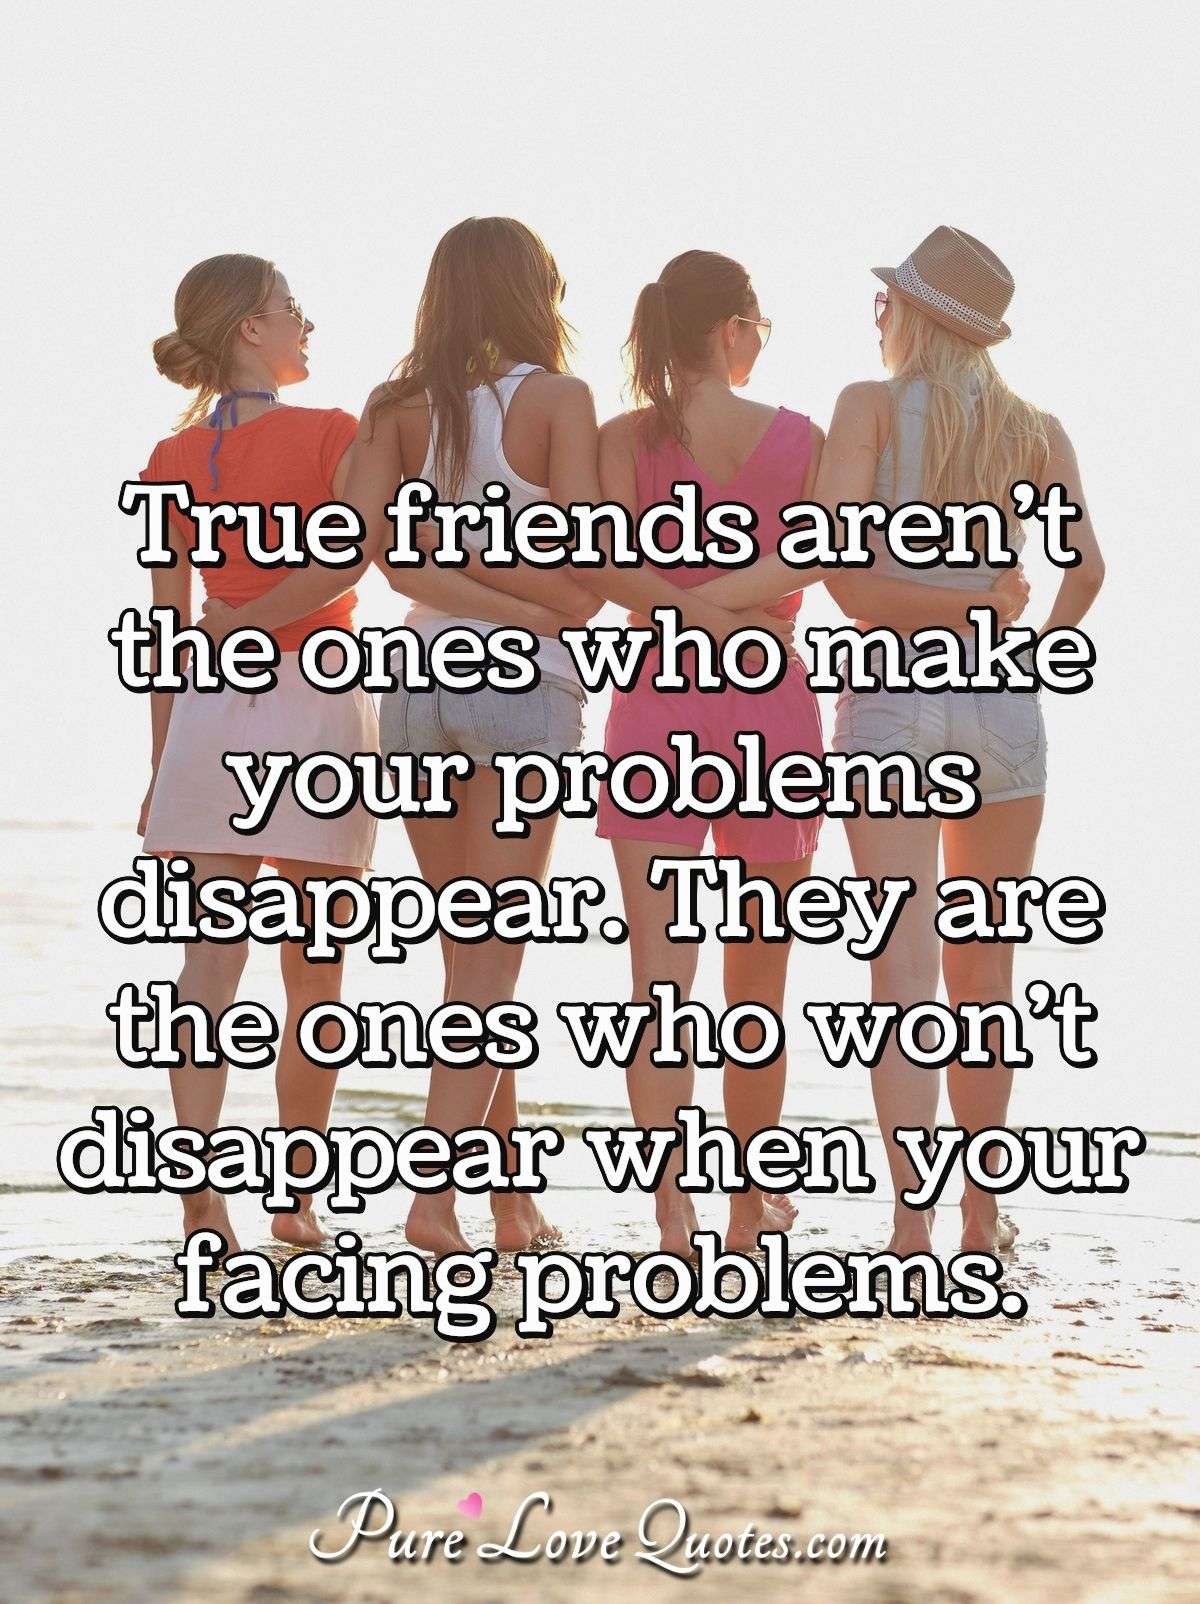 True friends aren't the ones who make your problems disappear. They are the ones who won't disappear when your facing problems. - Anonymous